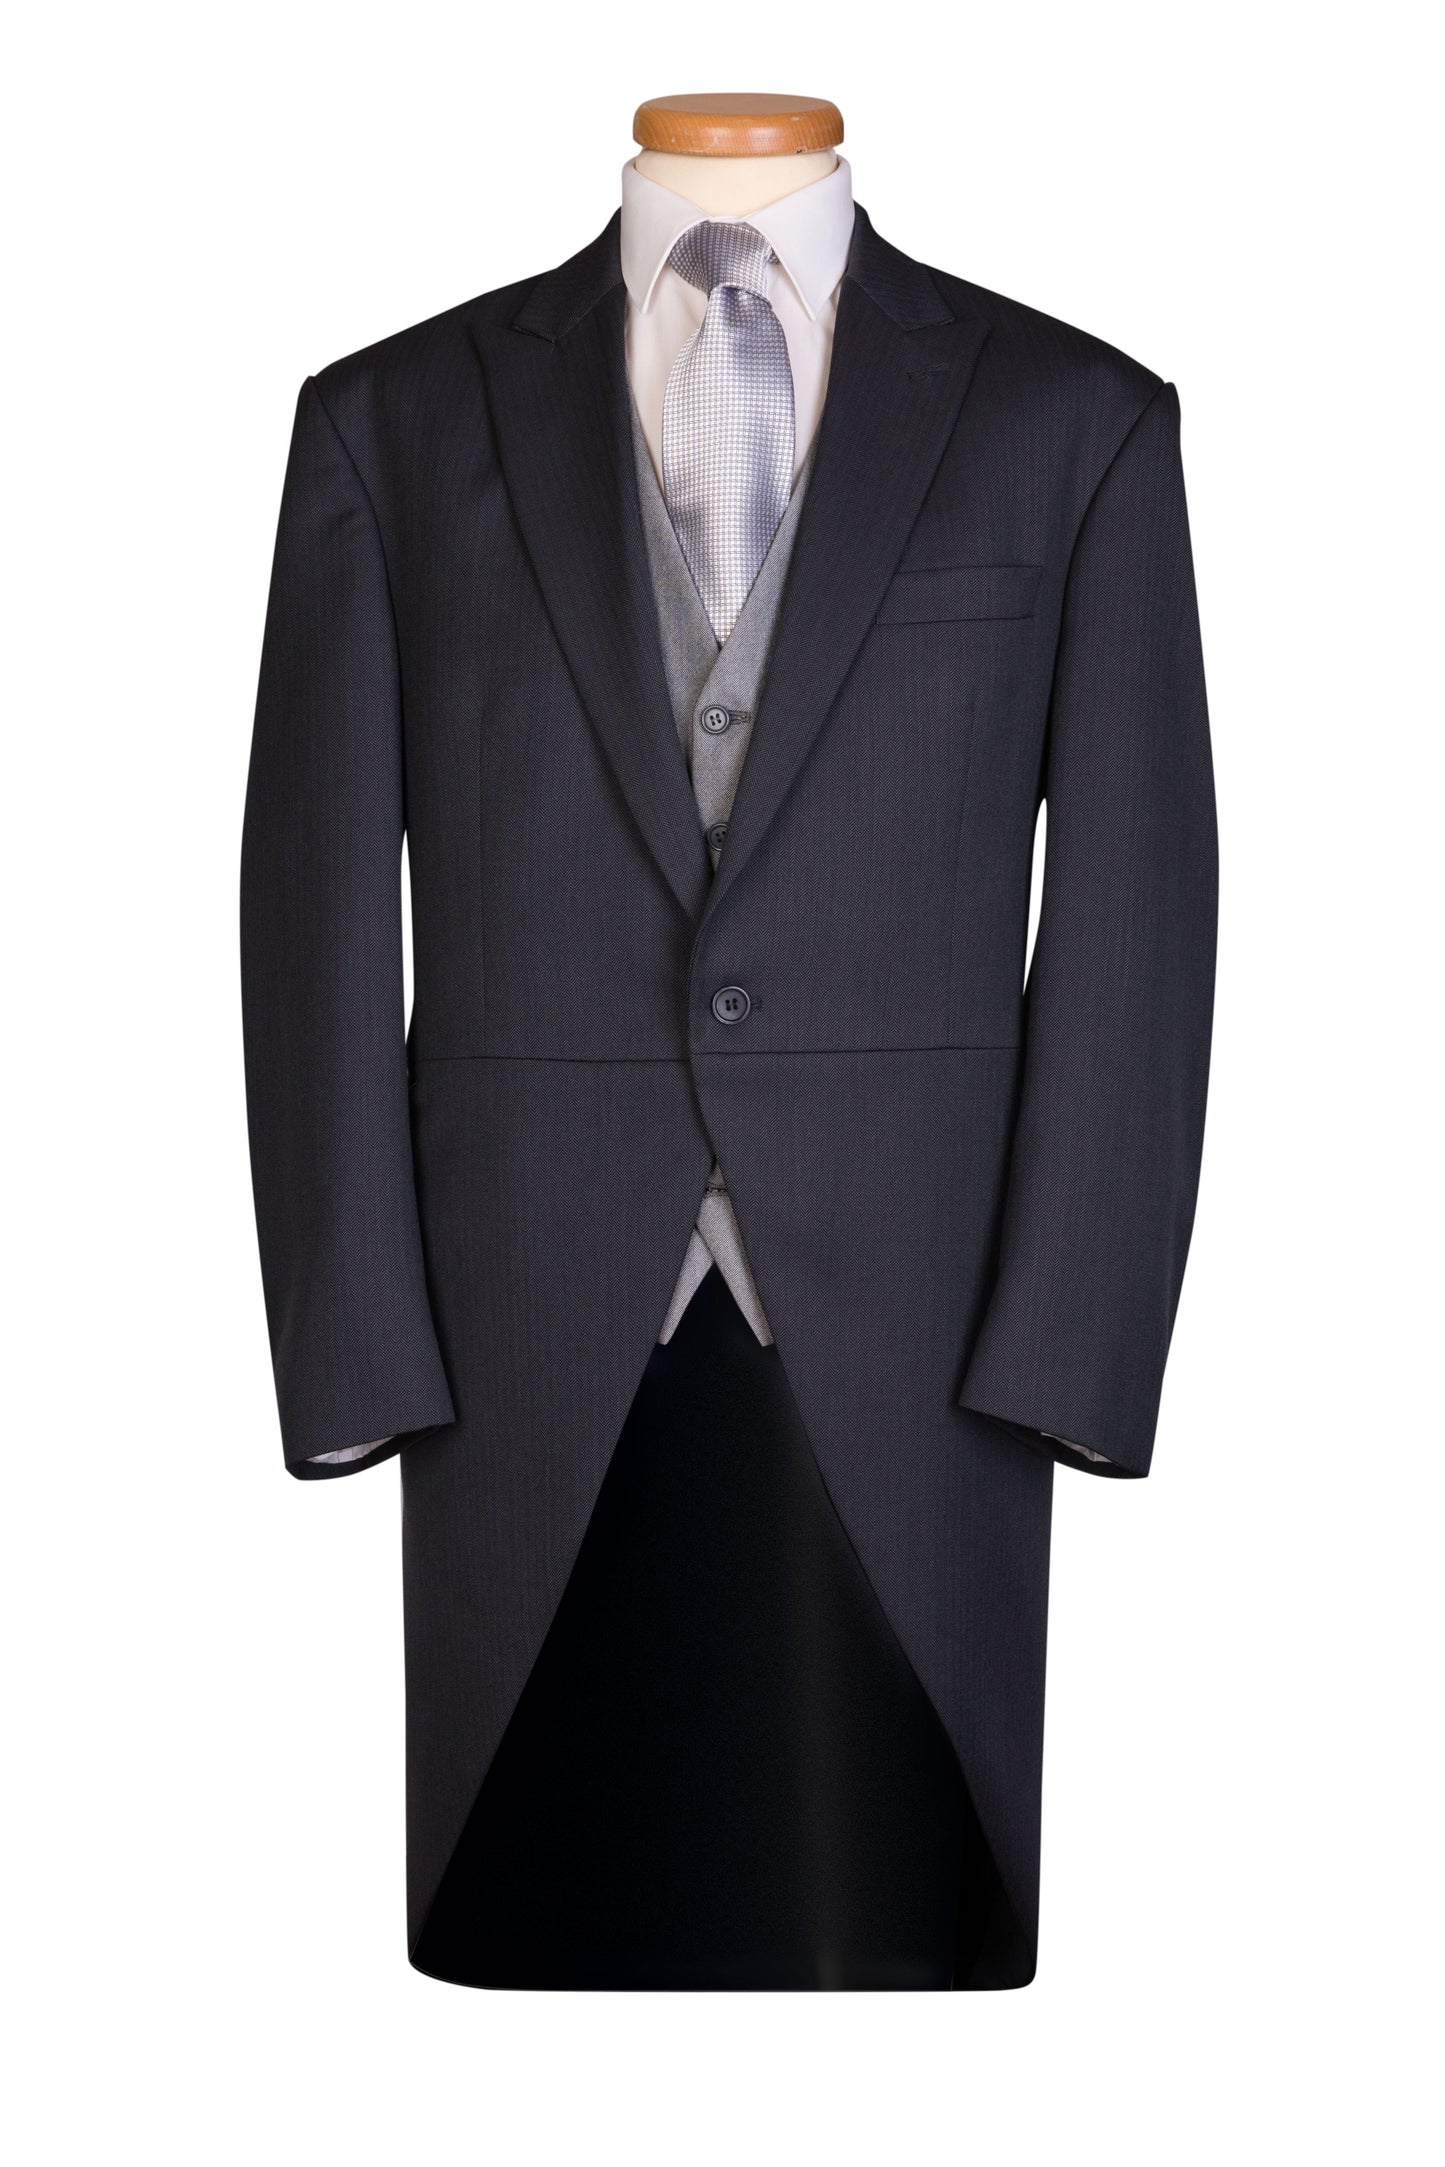 Charcoal Grey Wedding Tailcoat Suit - Ex Hire